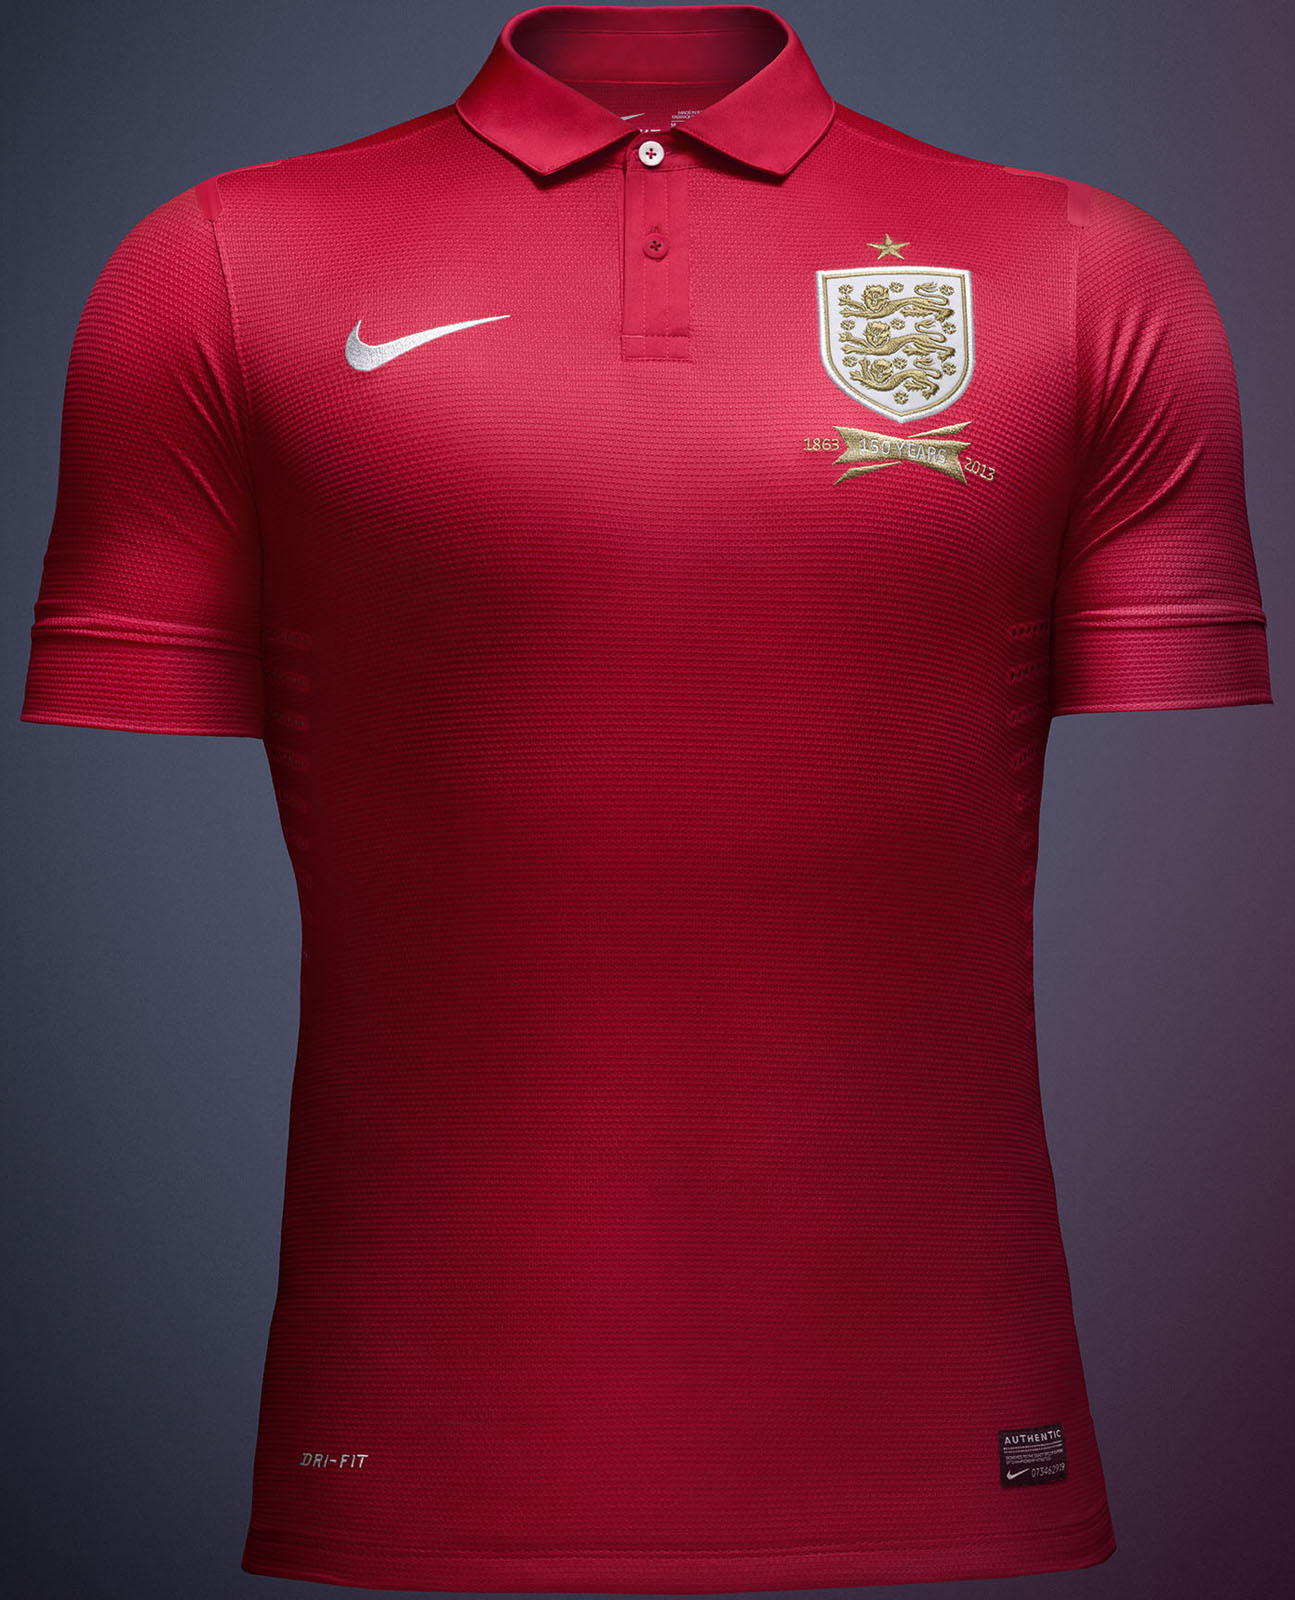 New Nike England 2013 Home and Away Kits Released - Footy He